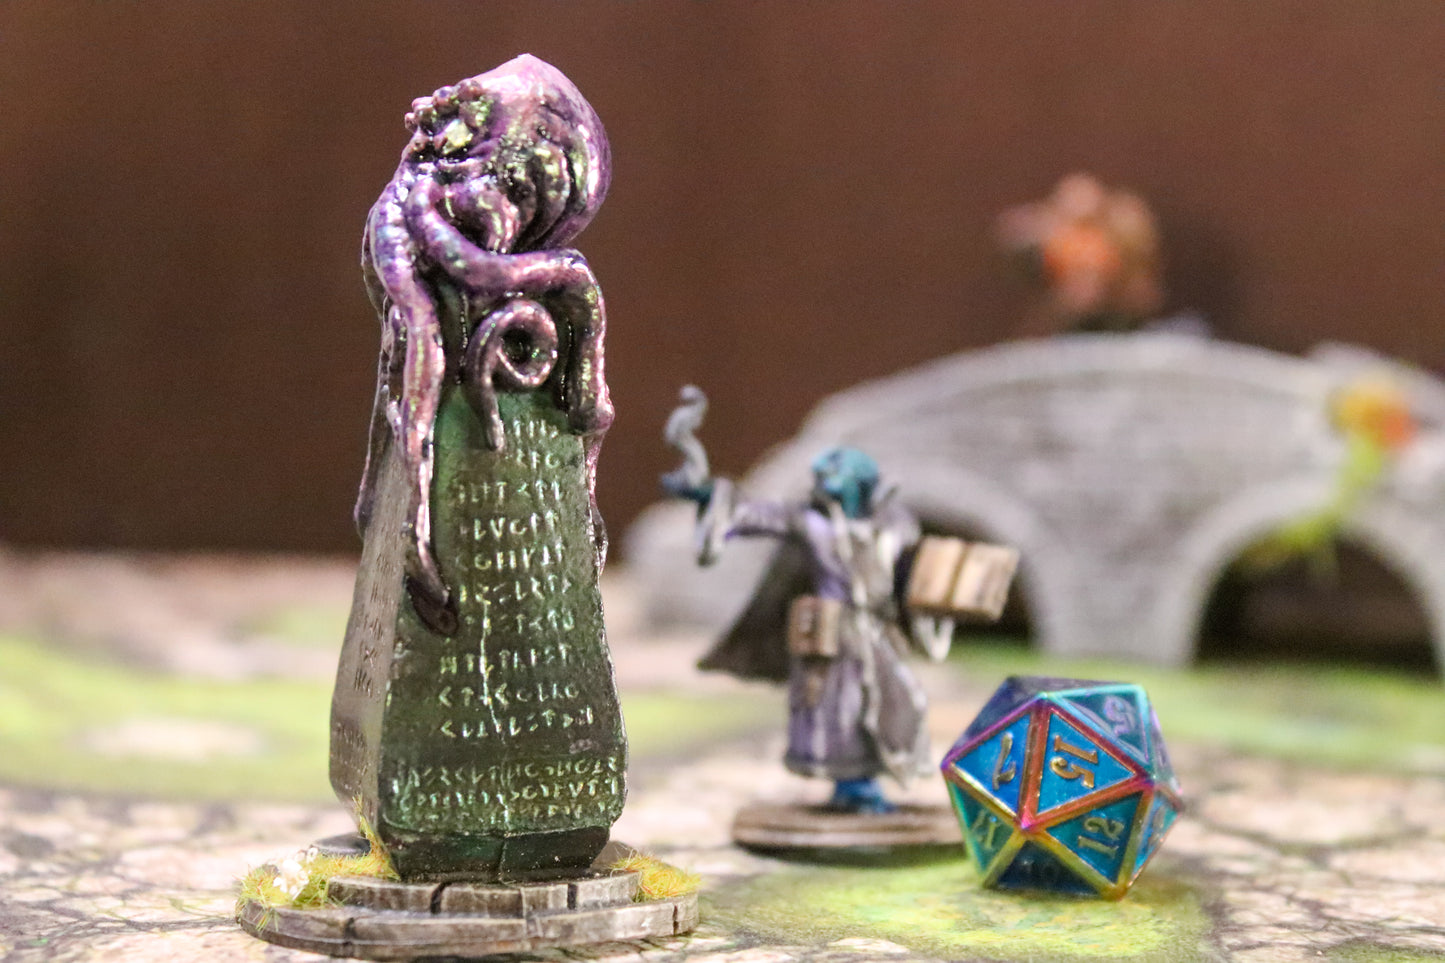 Cthulhu Statue - 28mm handpainted for RPG miniature games